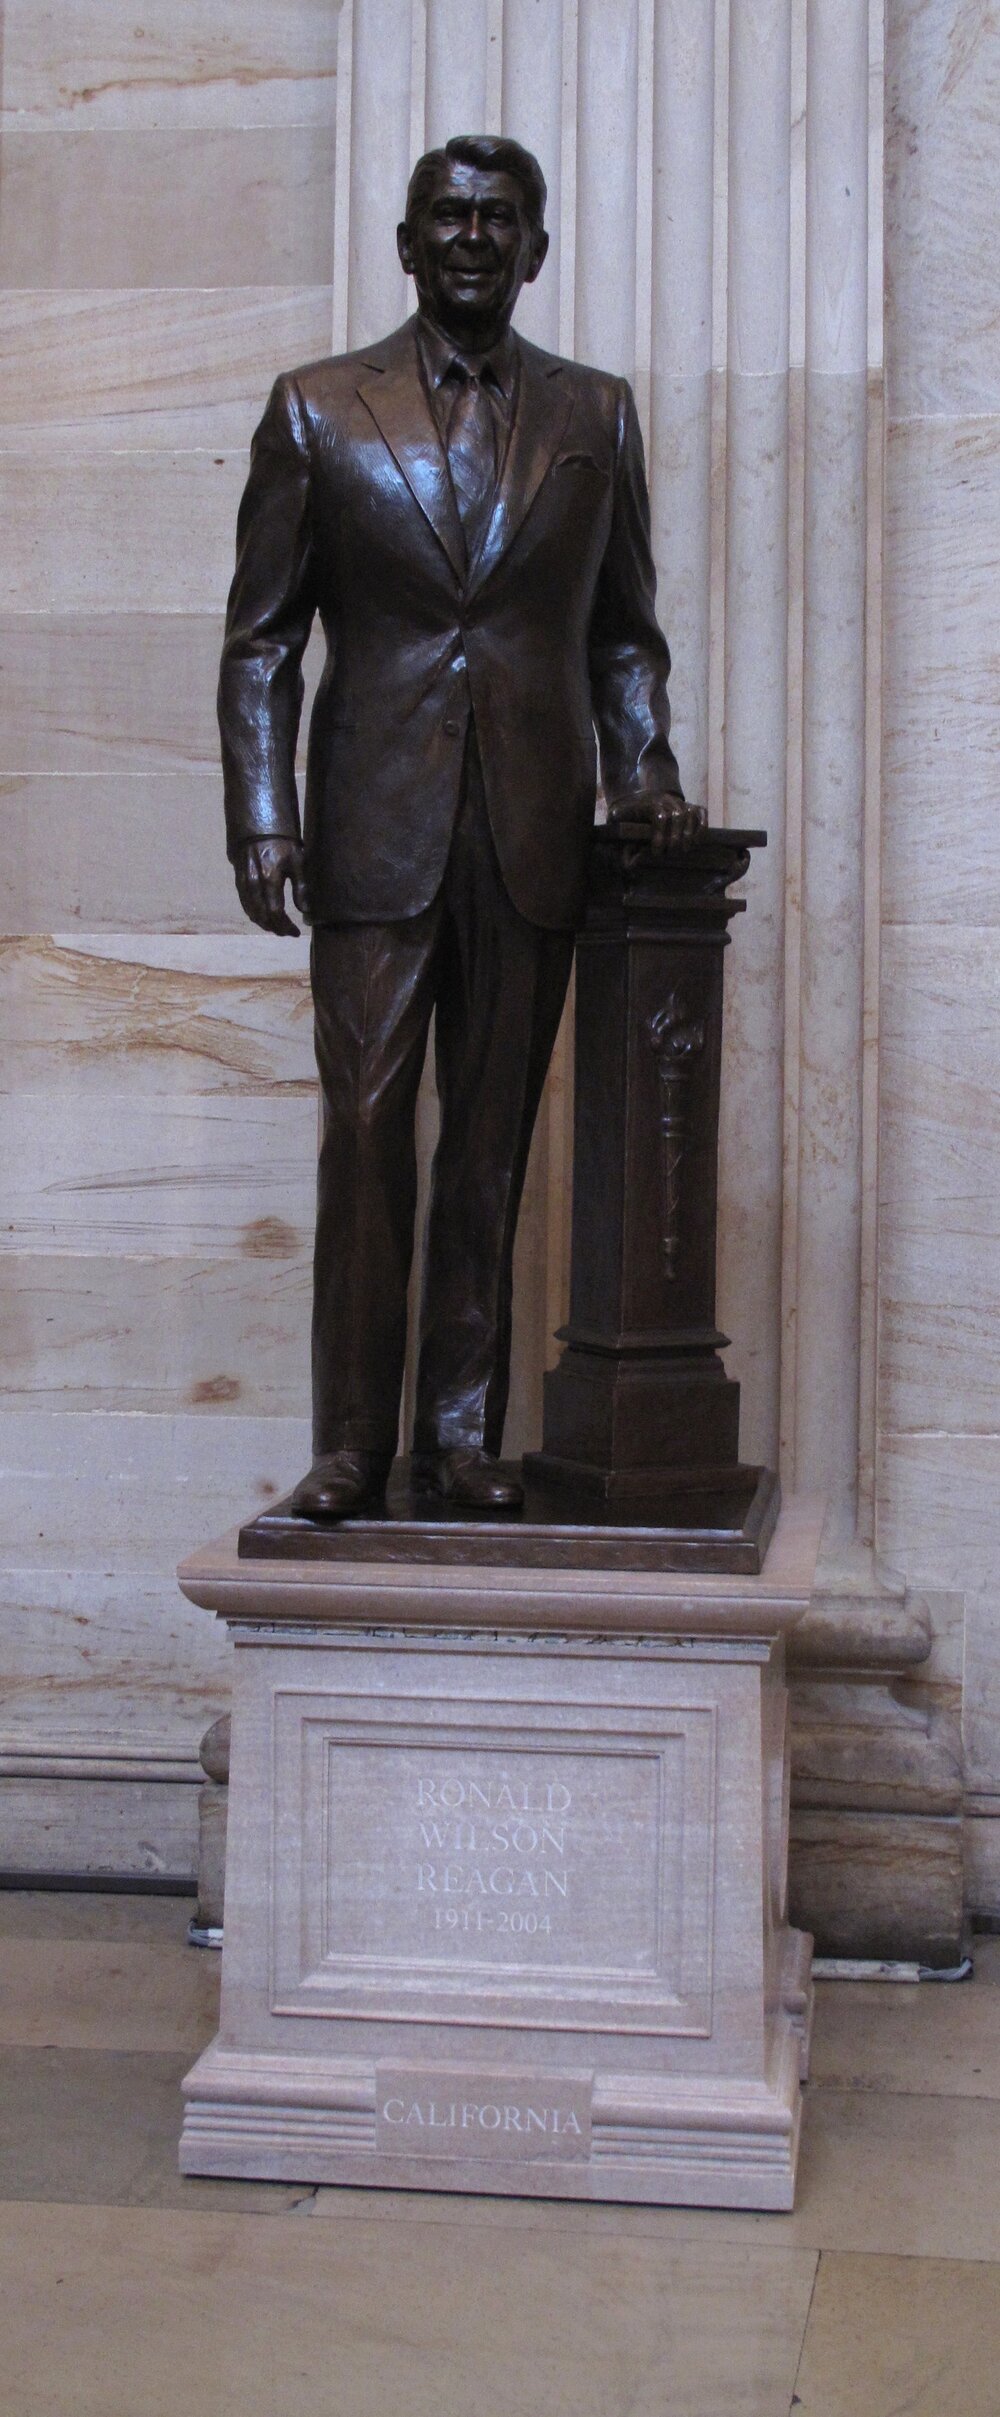 04_Reagan Base_Finished statue and base in the US Capitol Rotunda.jpg